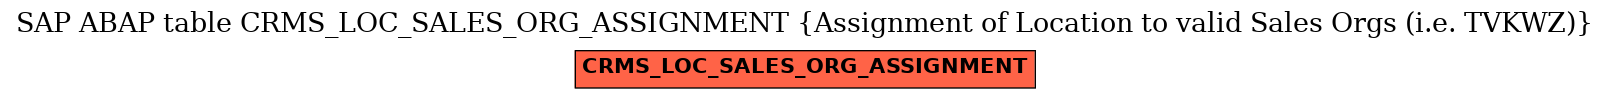 E-R Diagram for table CRMS_LOC_SALES_ORG_ASSIGNMENT (Assignment of Location to valid Sales Orgs (i.e. TVKWZ))